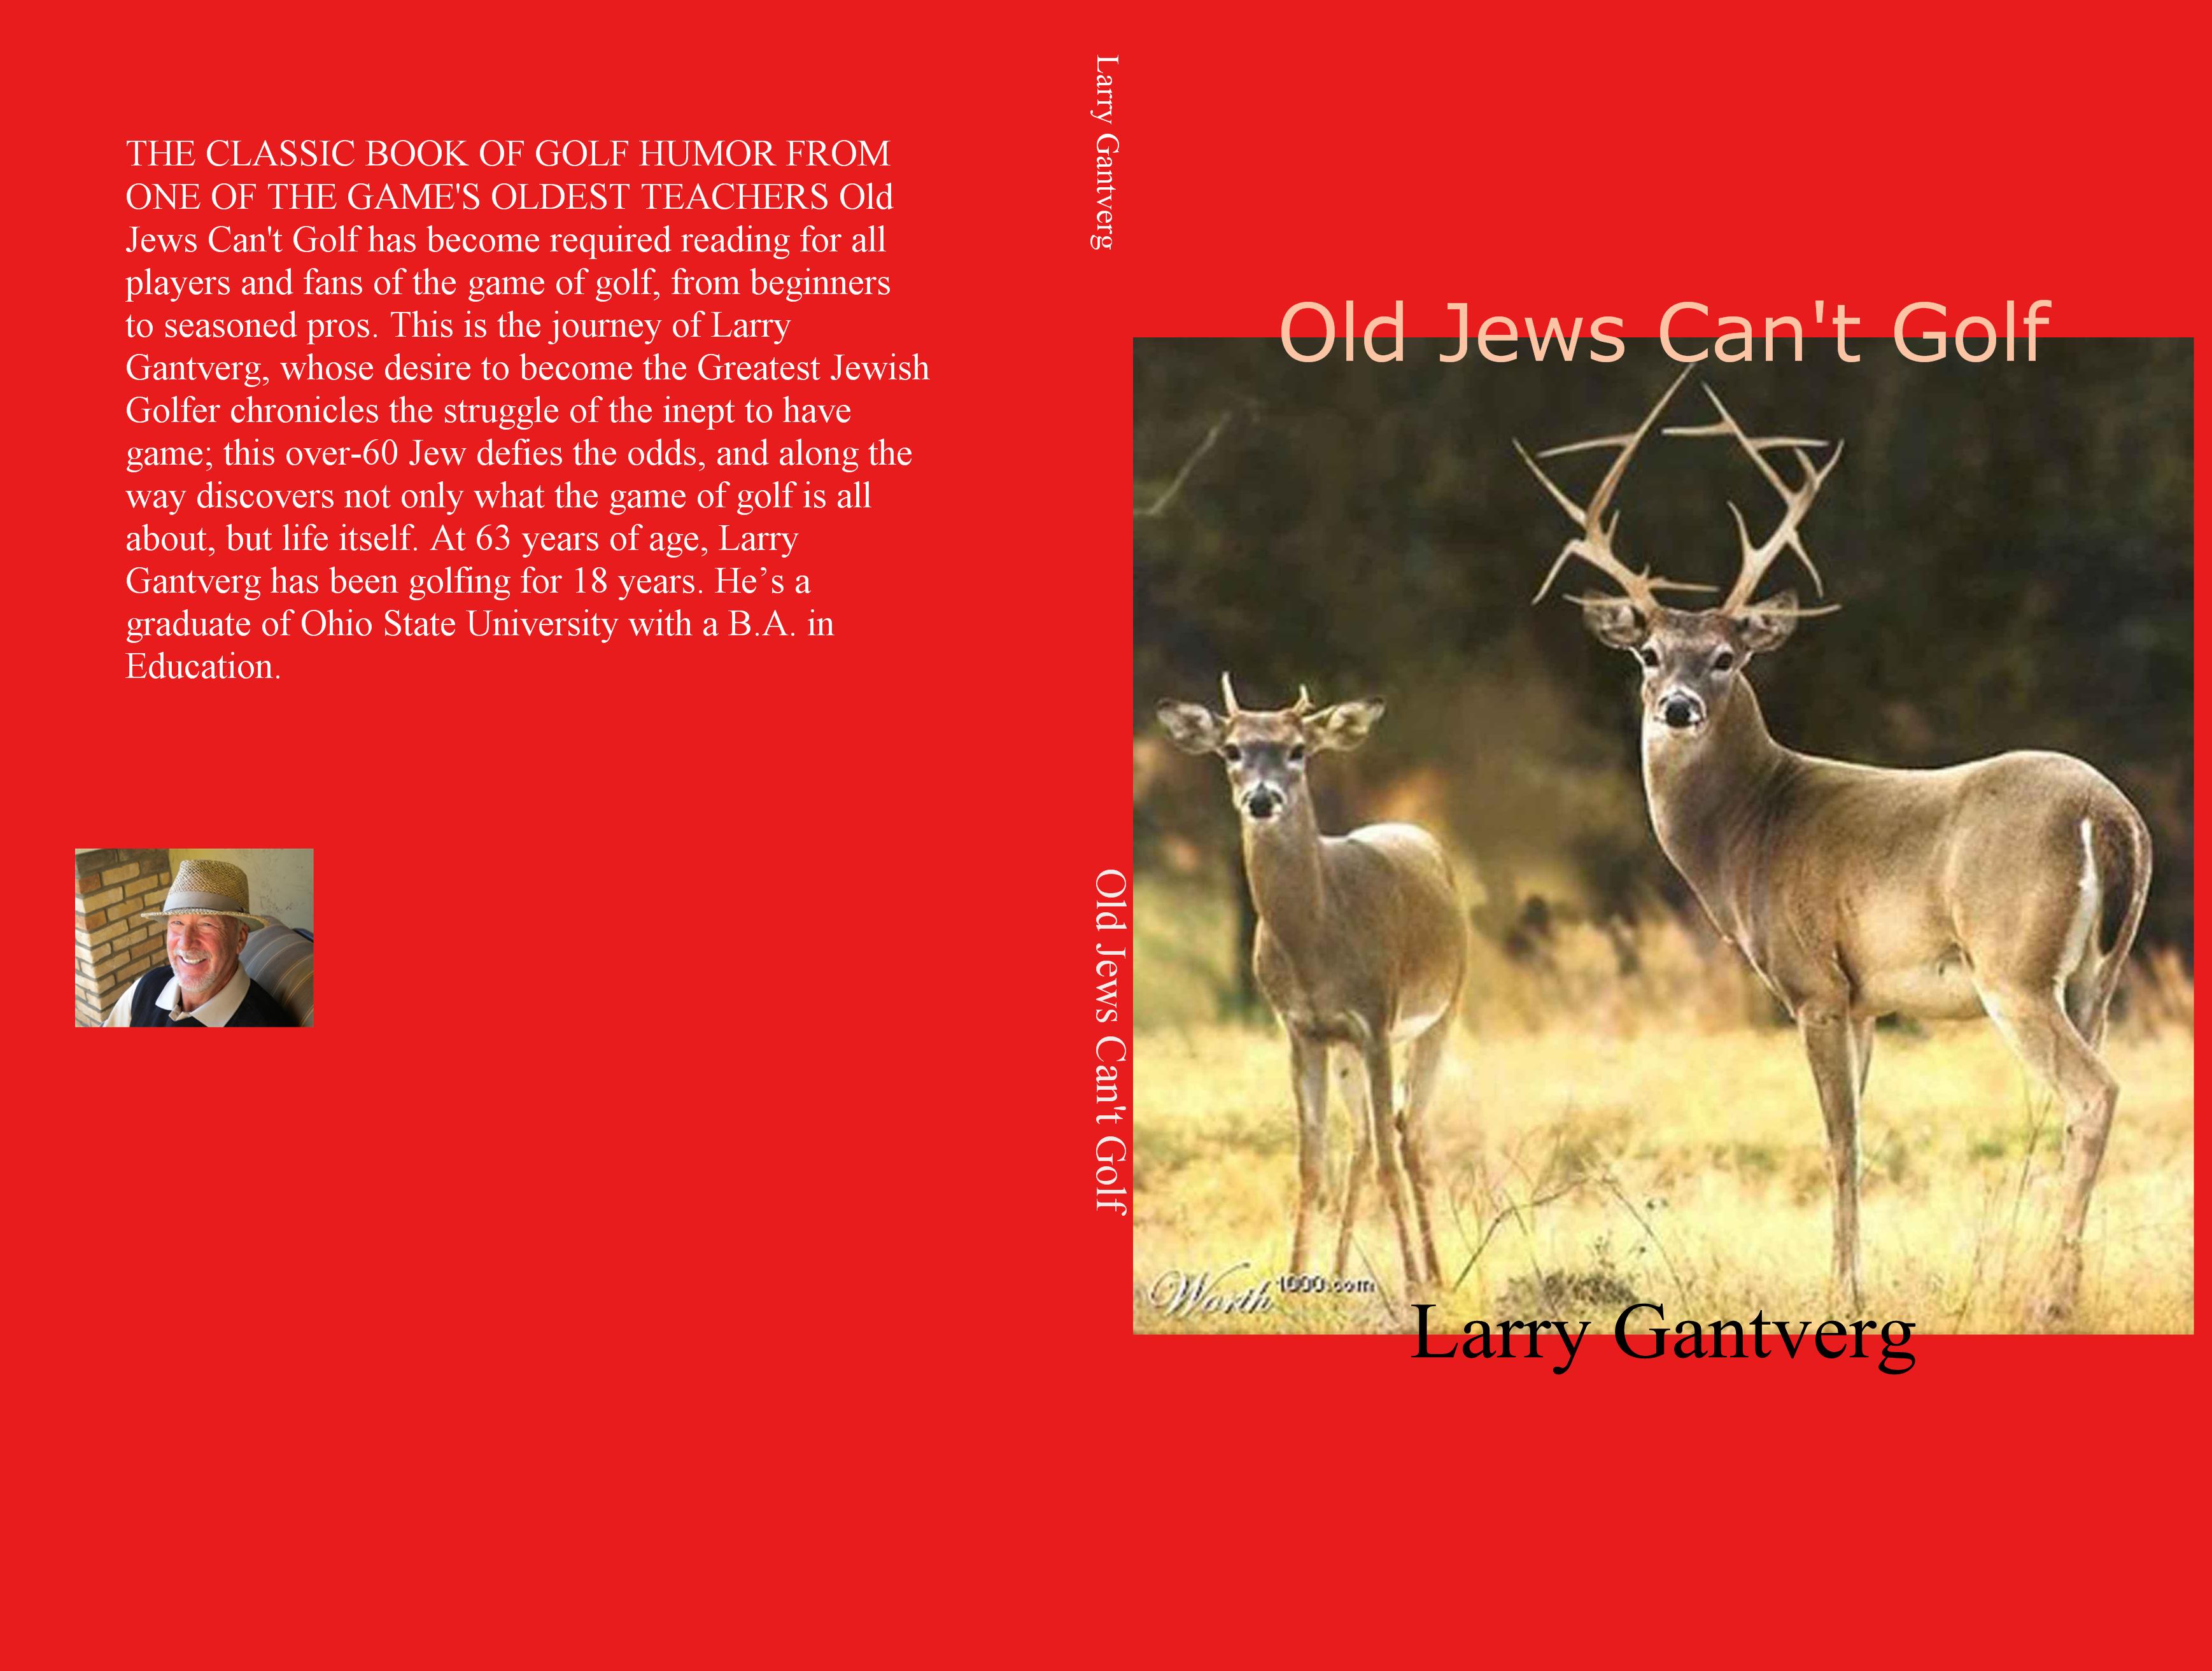 Old Jews Can